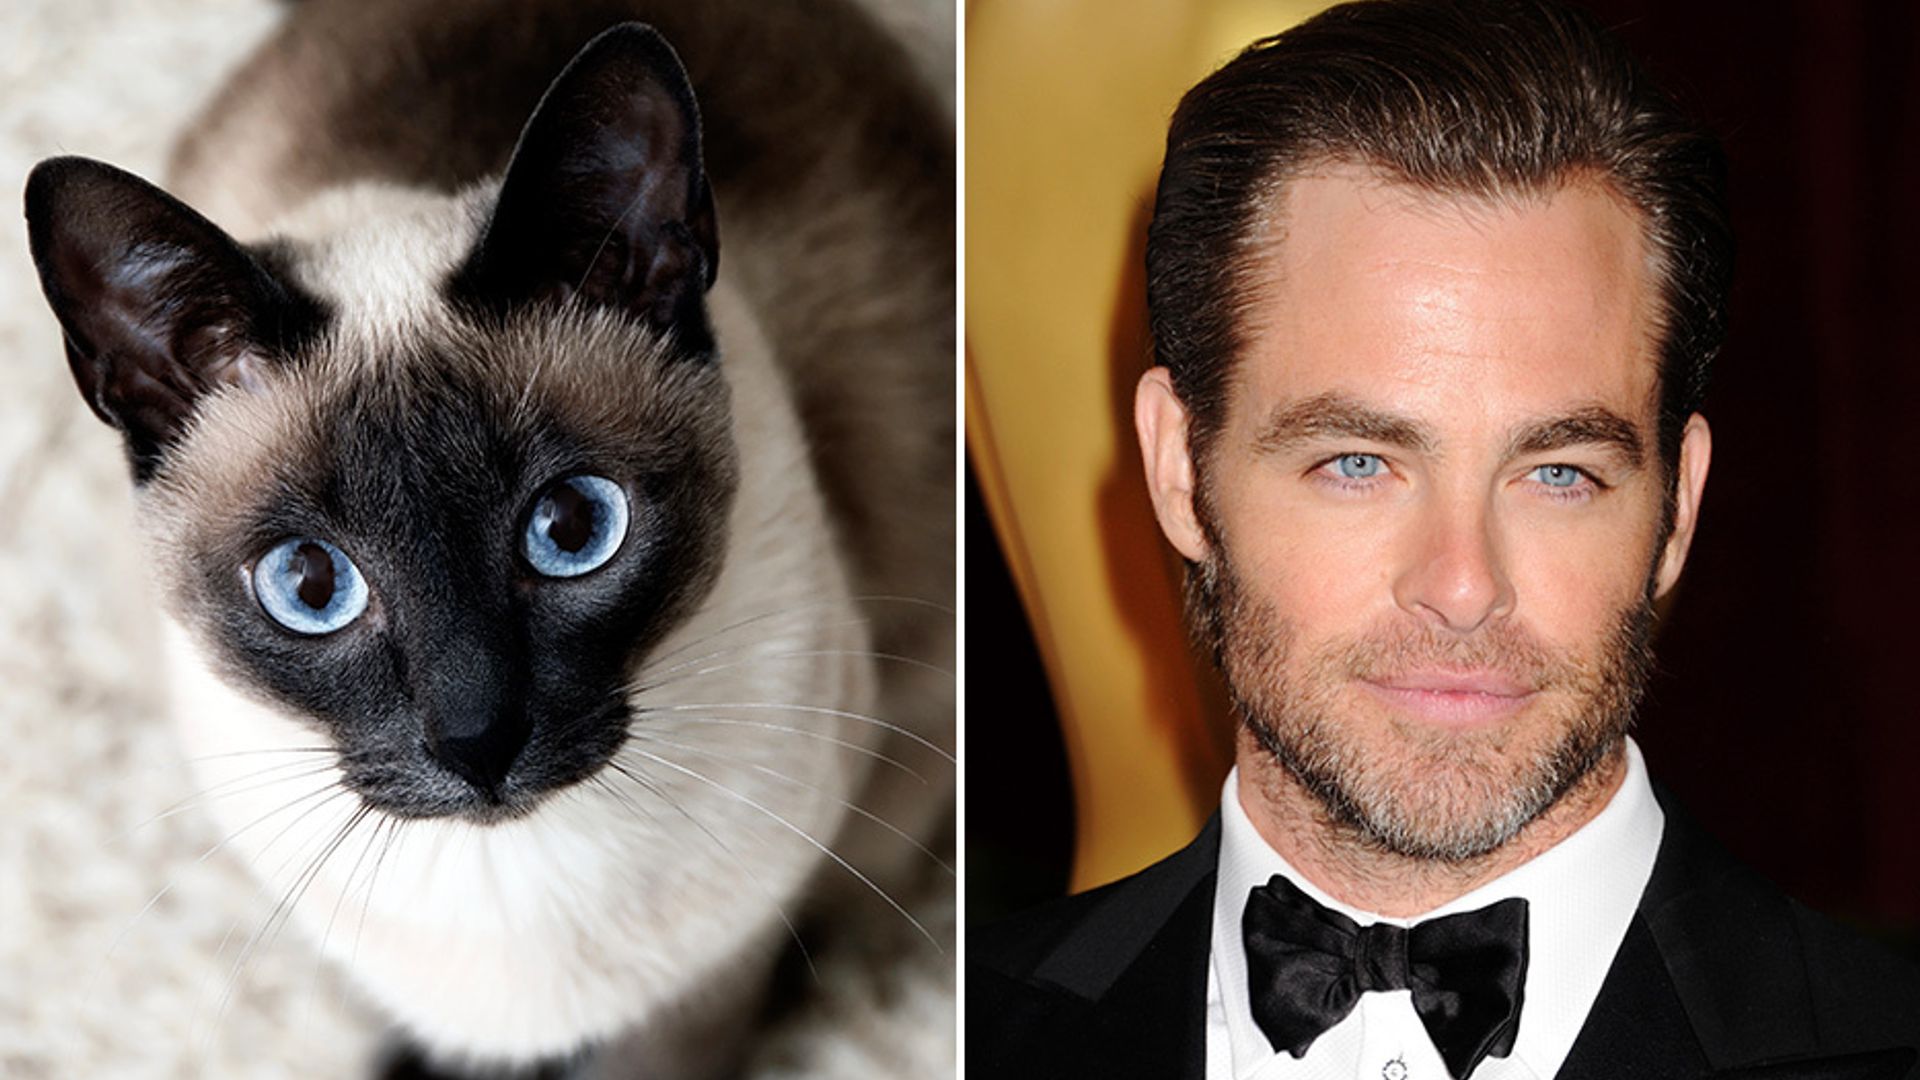 Matching celebrities with their cat soulmates